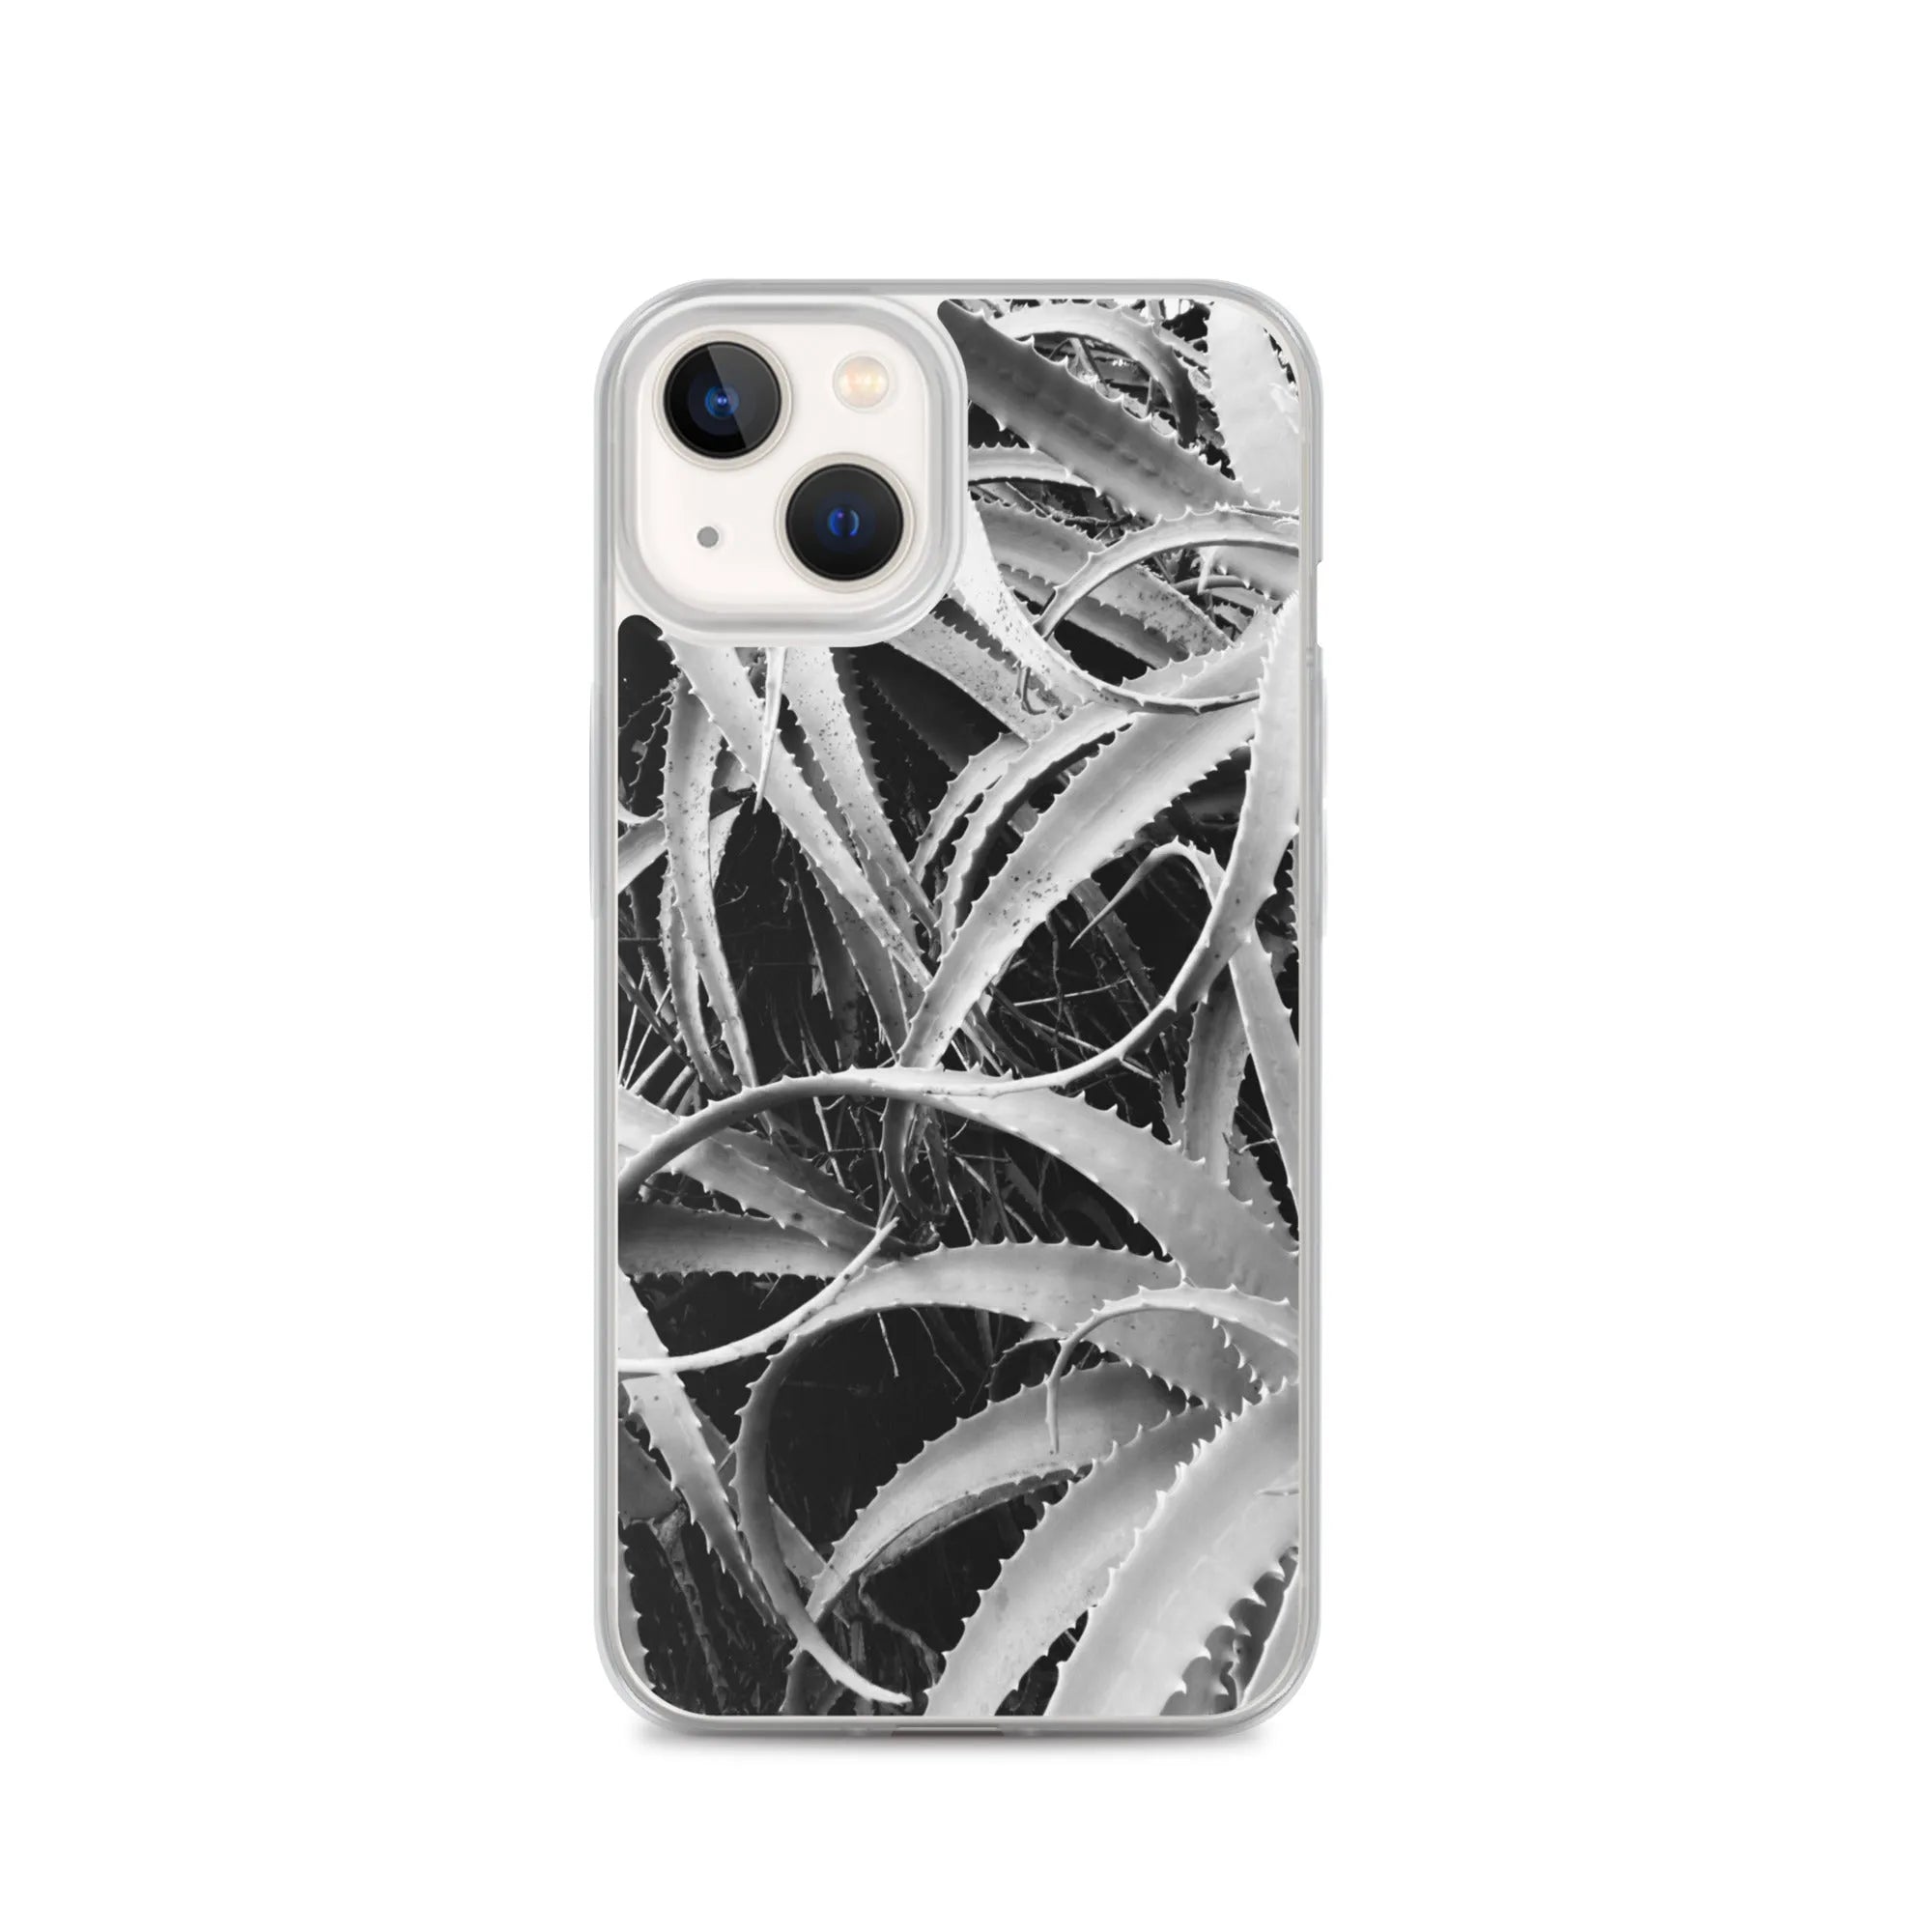 Spiked 2 + Too Botanical Art Iphone Case - Black And White - Iphone 13 - Mobile Phone Cases - Aesthetic Art